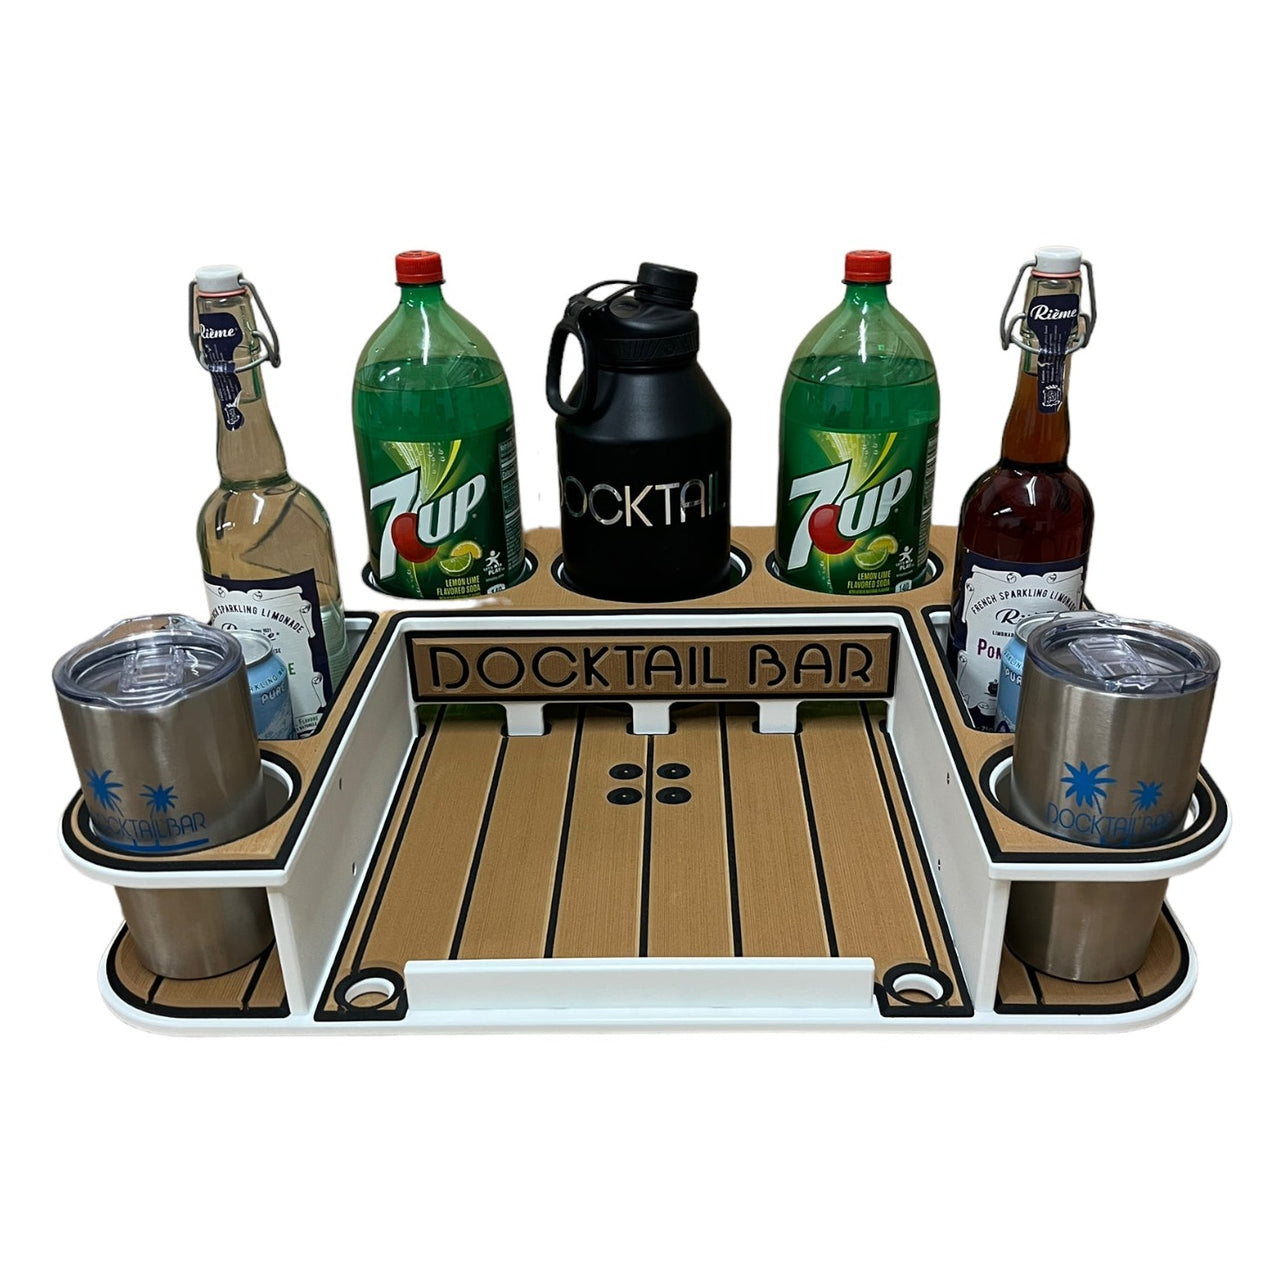 Docktail Butler Boat Table and Storage Accessory - Choose Your Mount, Color & Custom Name